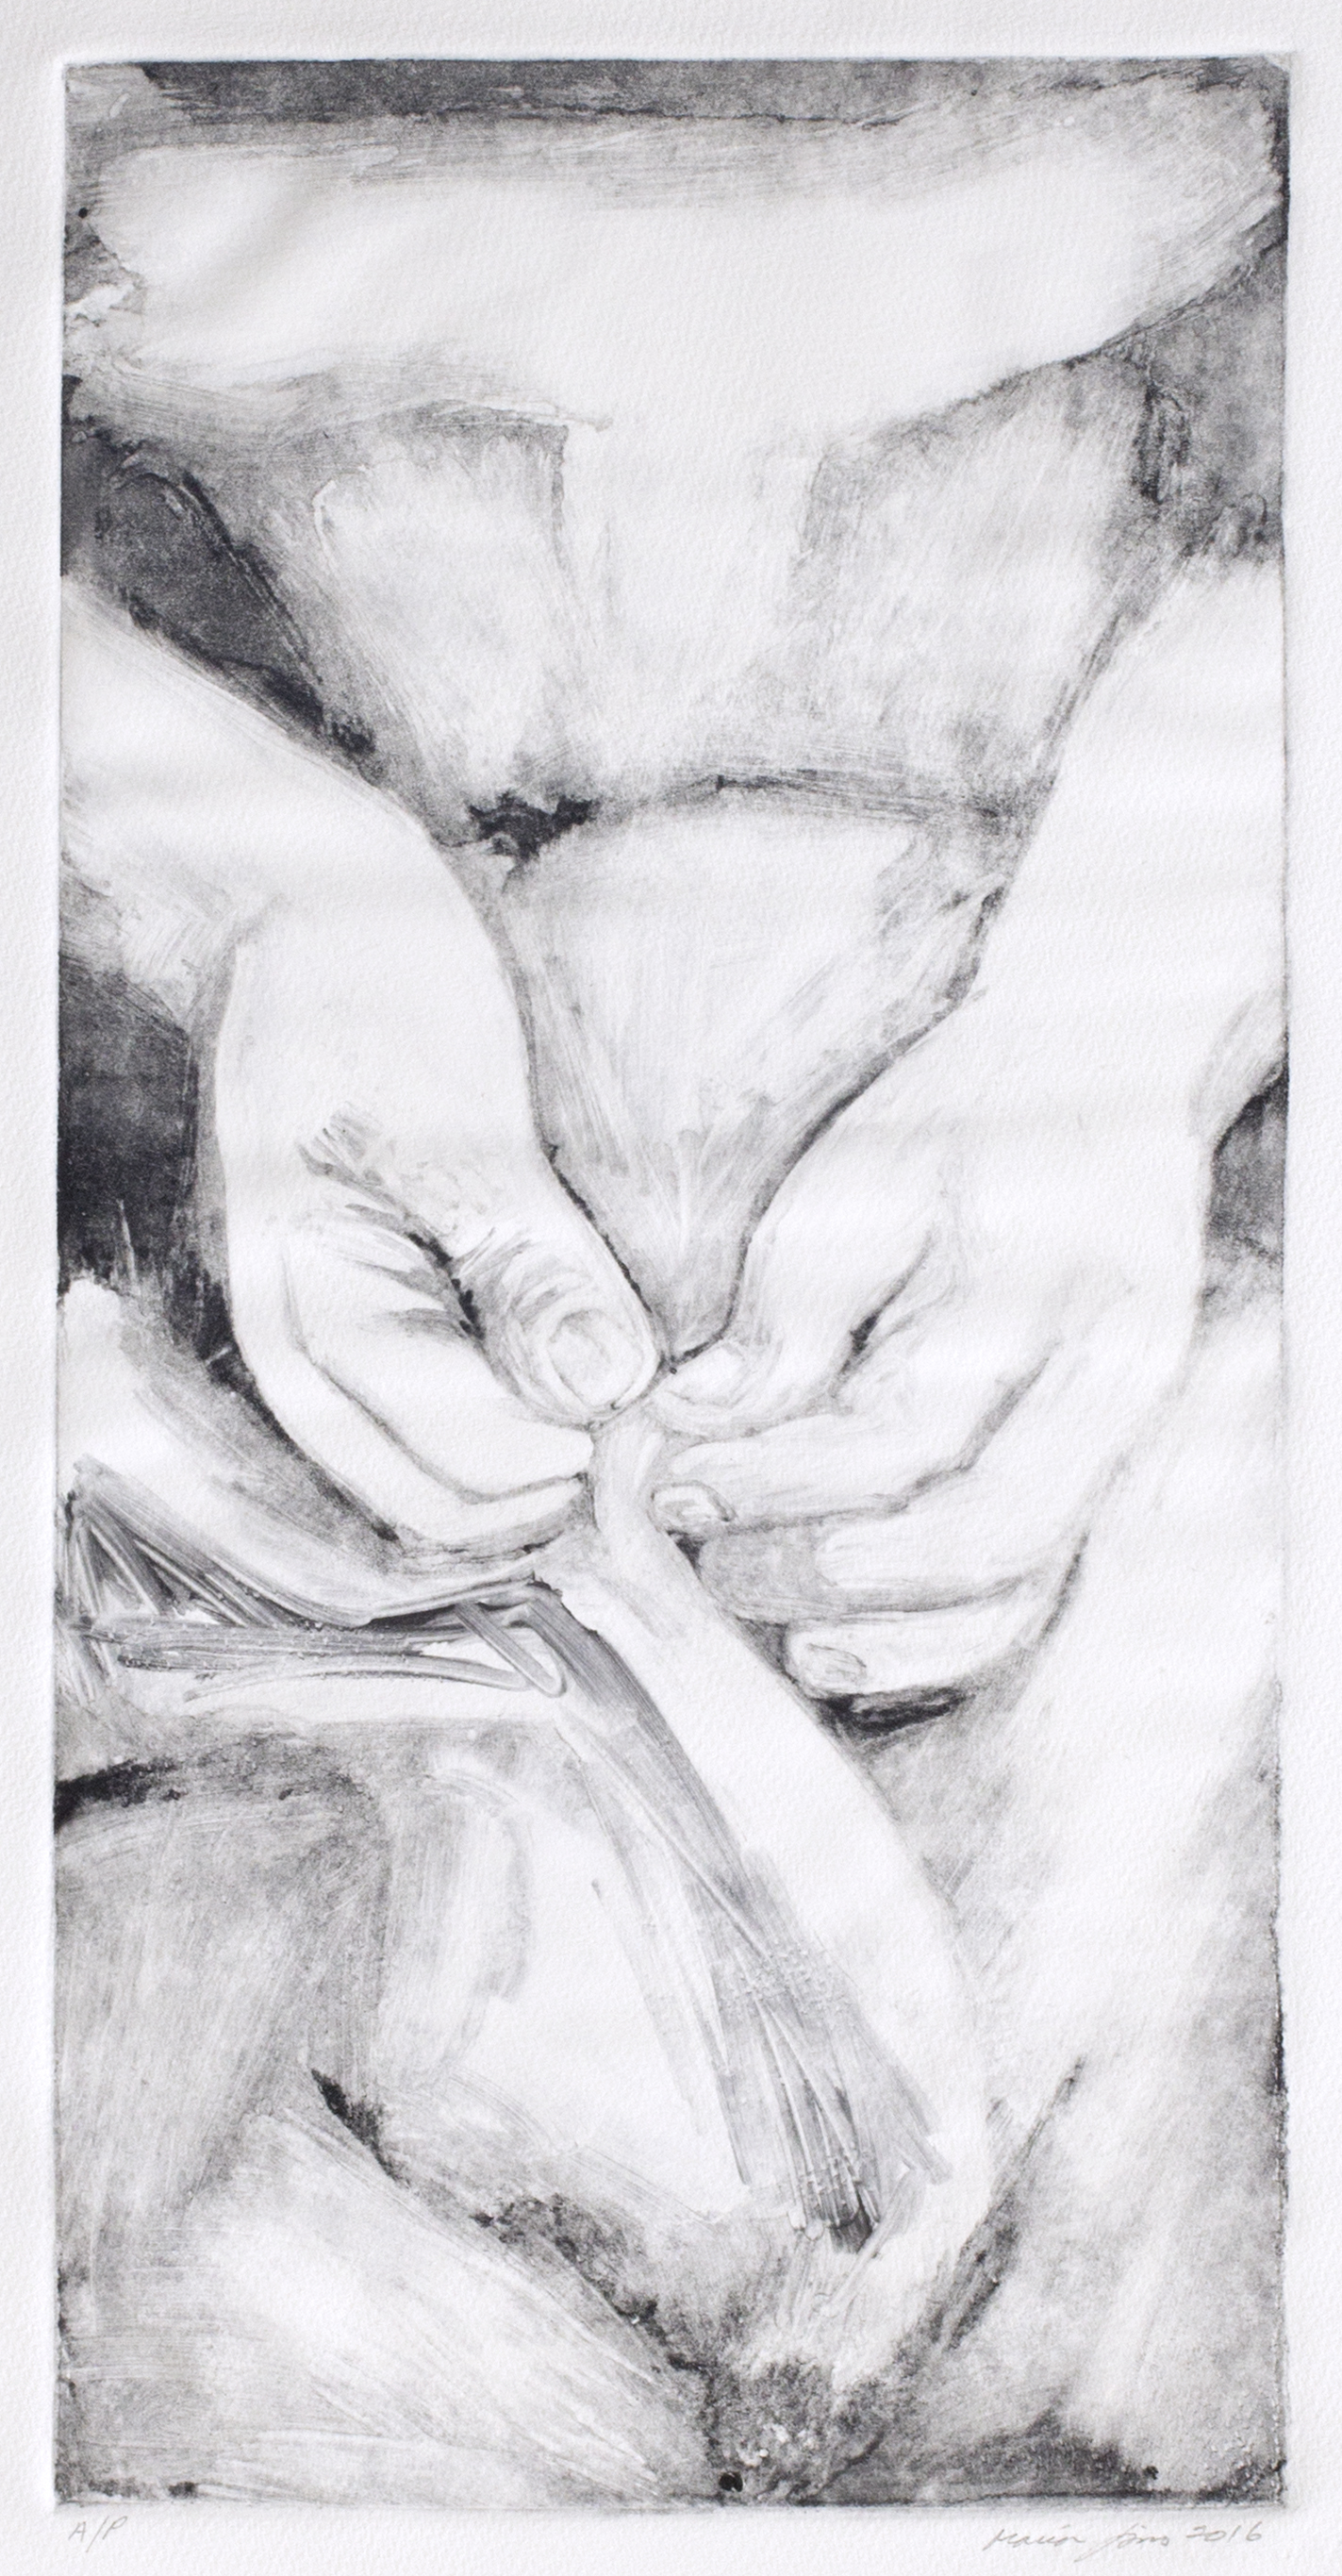 Sewing Hands (ghost print)